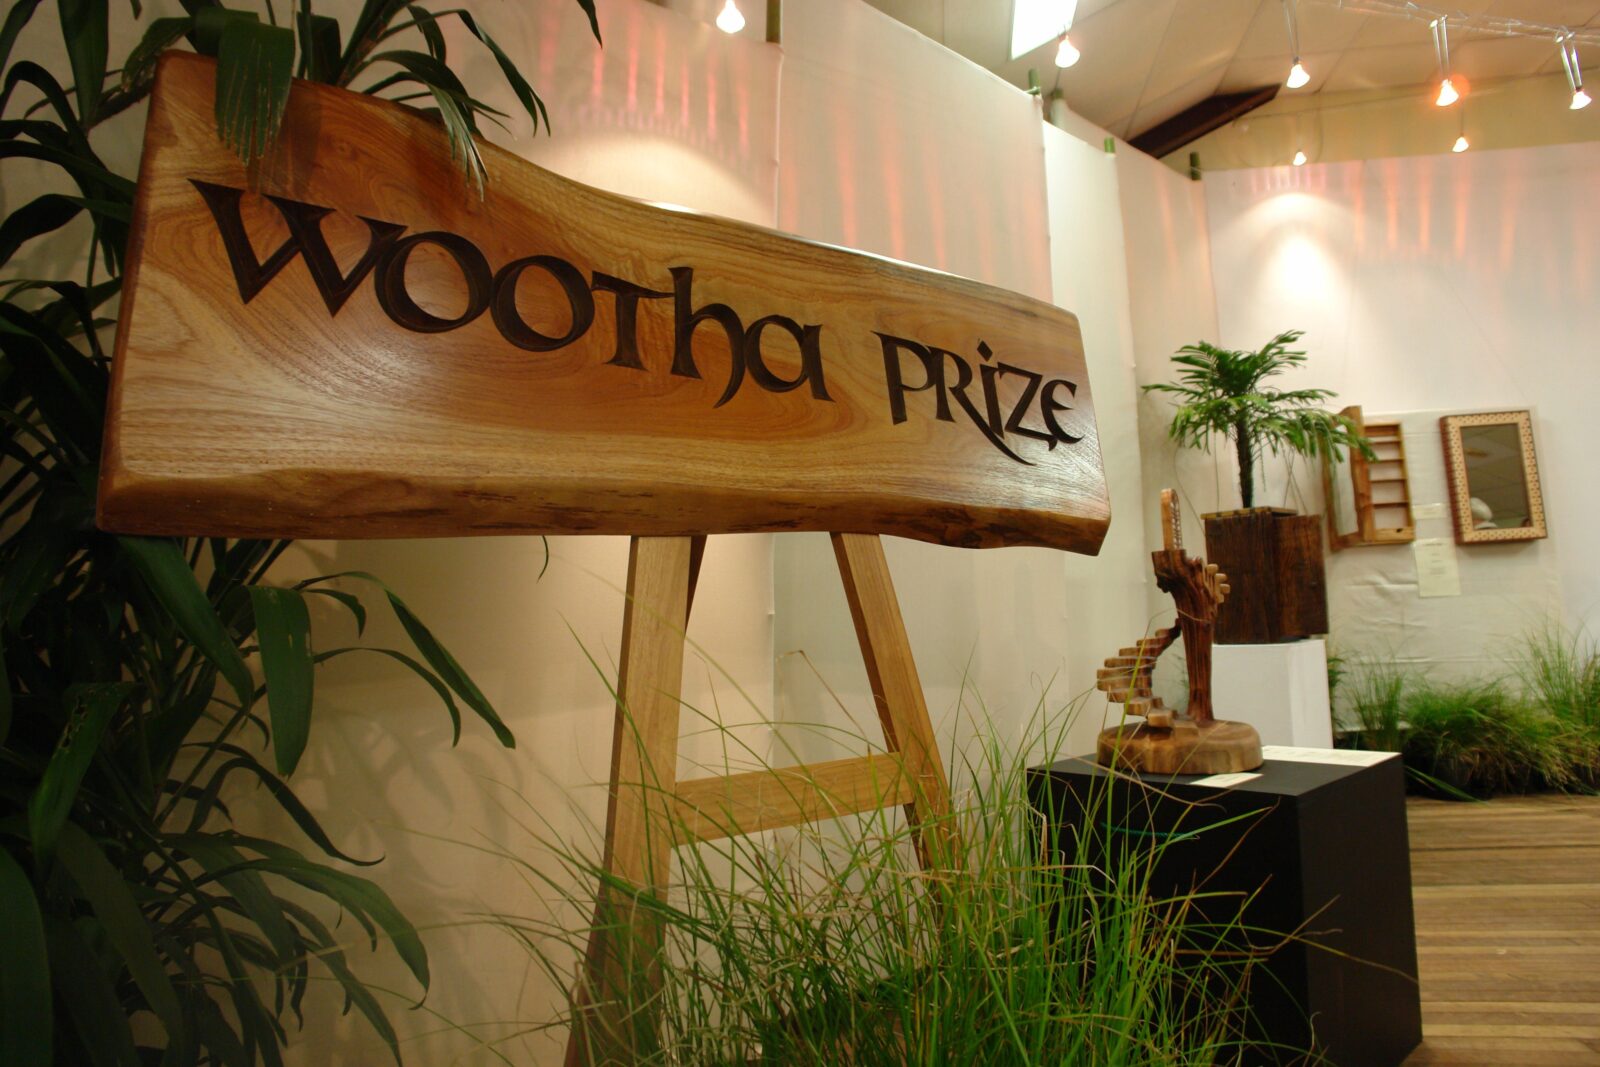 The Wootha Prize showcases local artists and timber creations